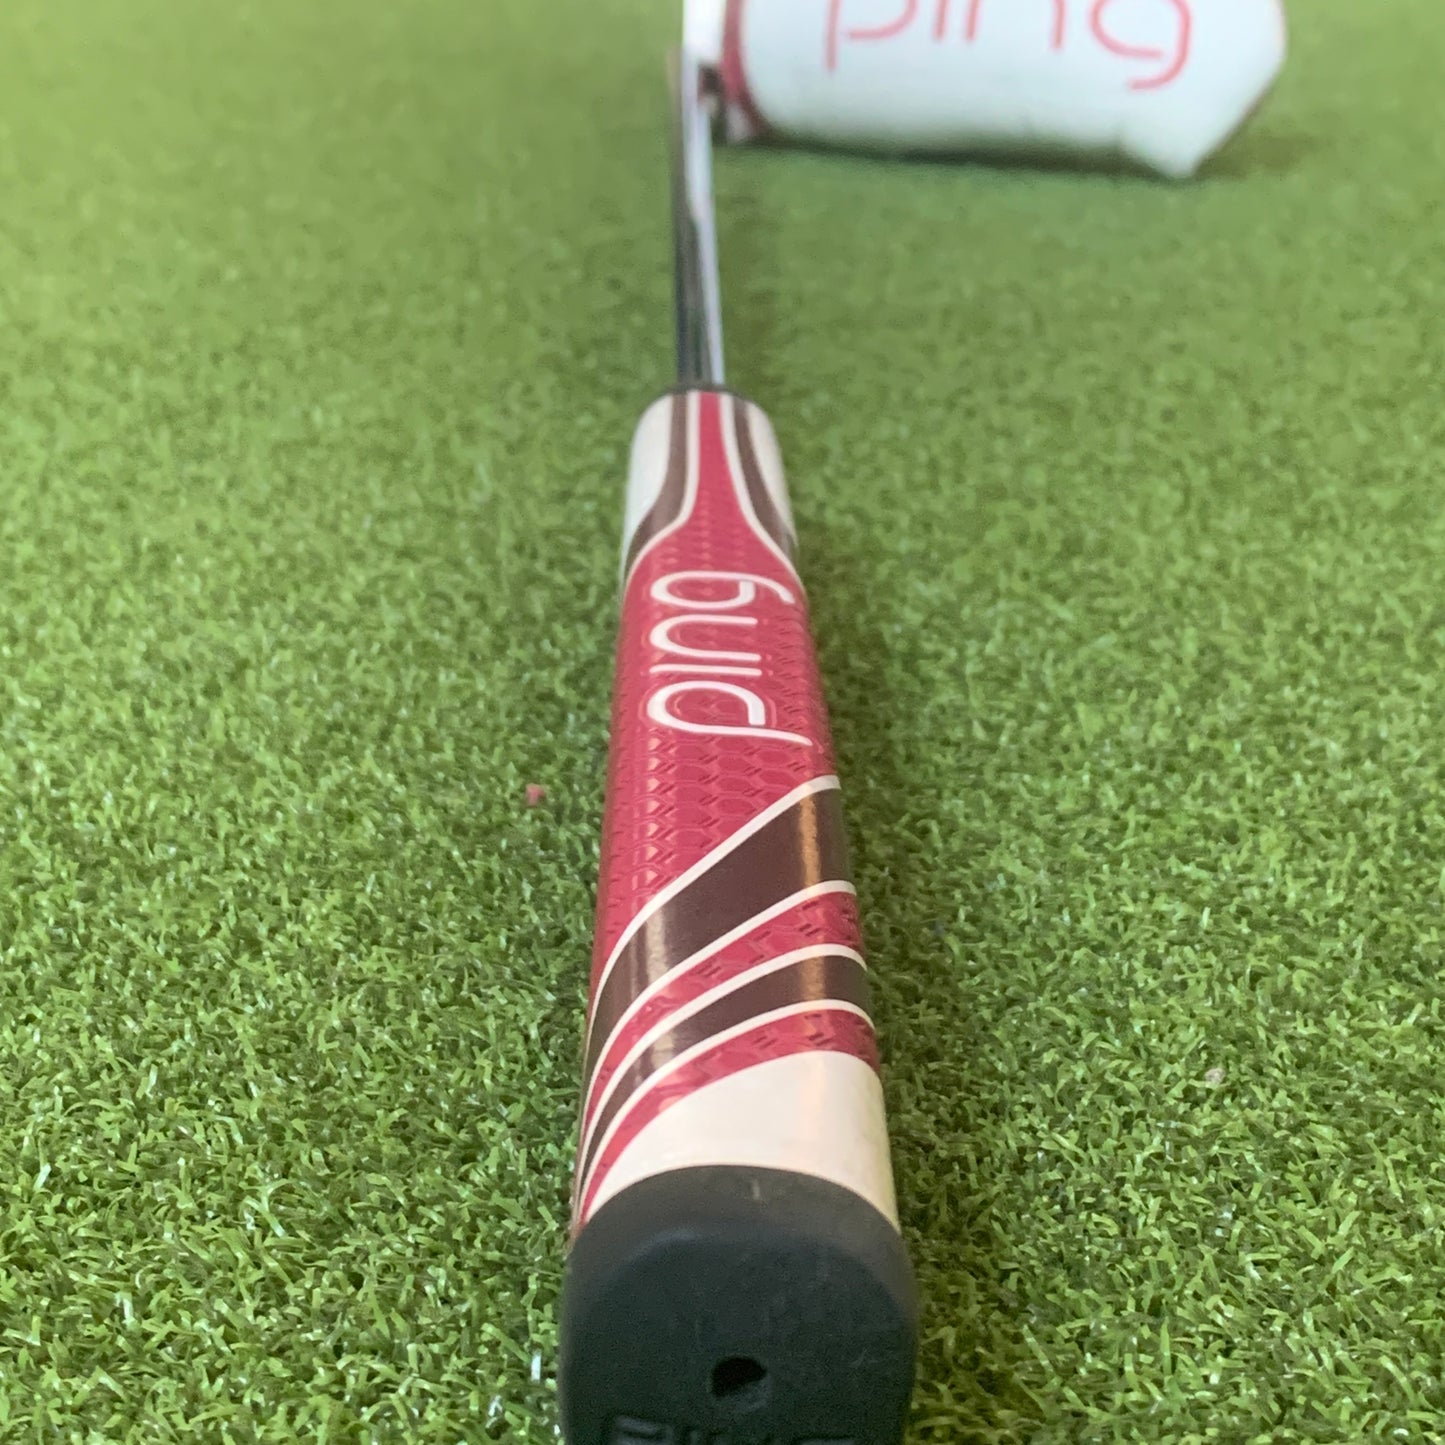 Pre-Owned Ladies RH Ping G Le2 Shea Putter